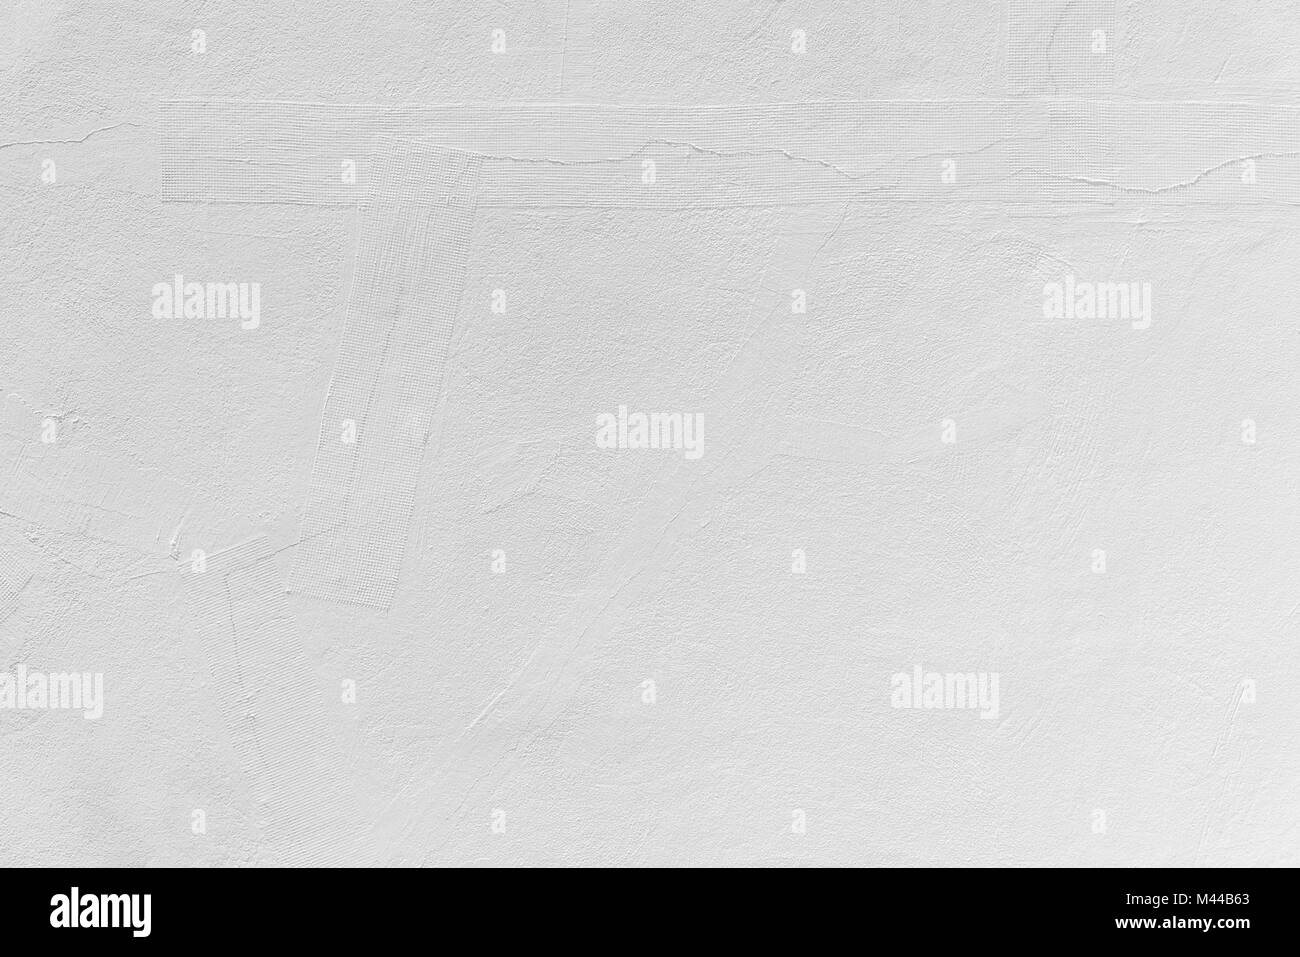 Abstract background from white concrete texture on clean wall. Architecture and building background. Stock Photo